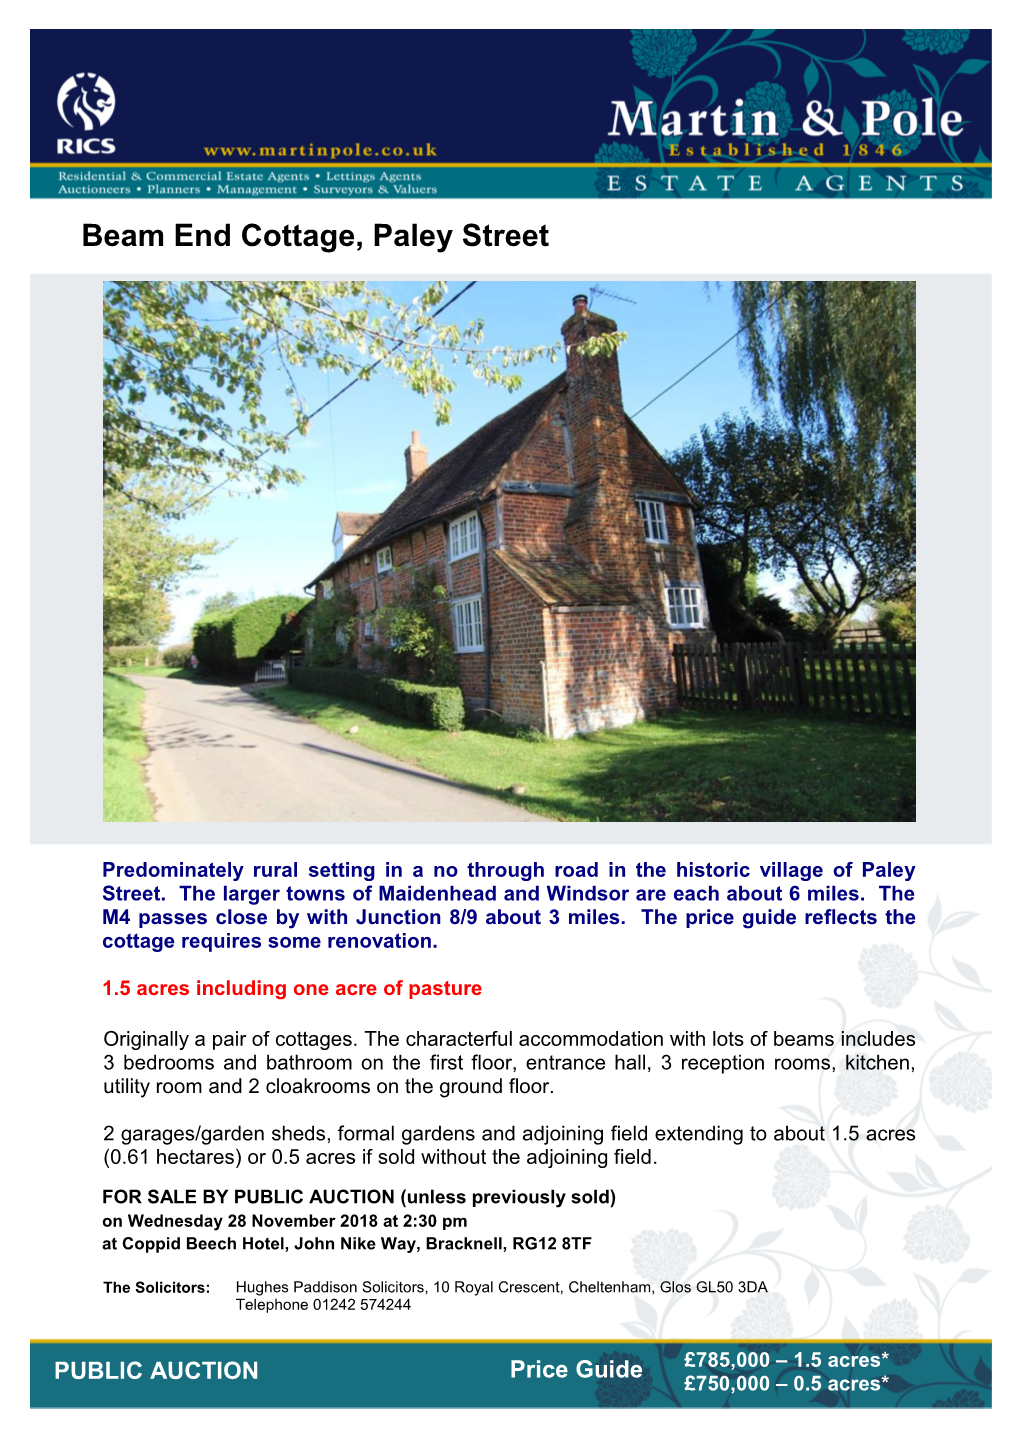 Beam End Cottage, Paley Street